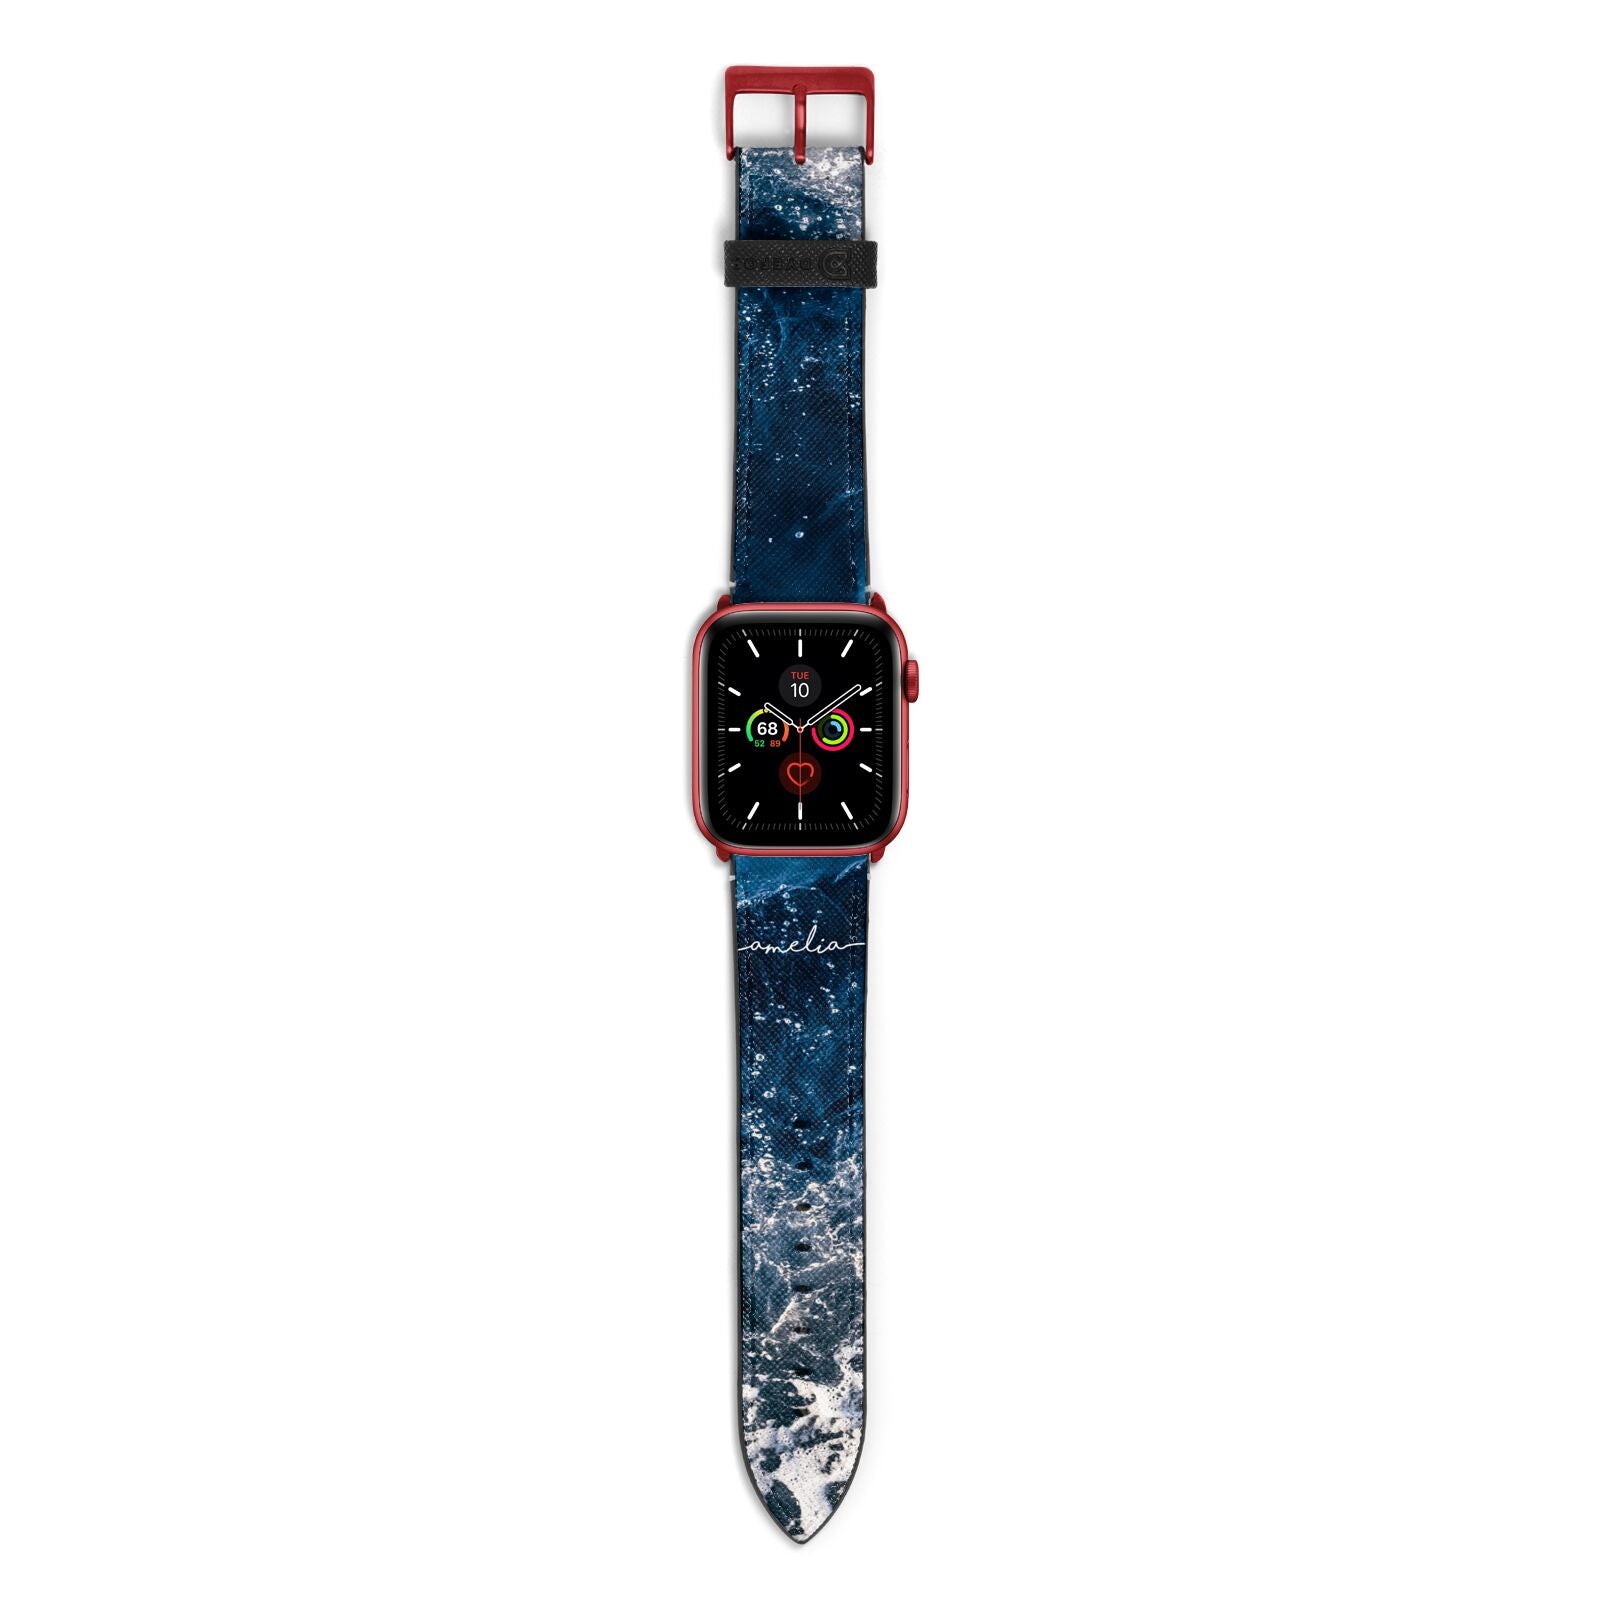 Custom Sea Apple Watch Strap with Red Hardware